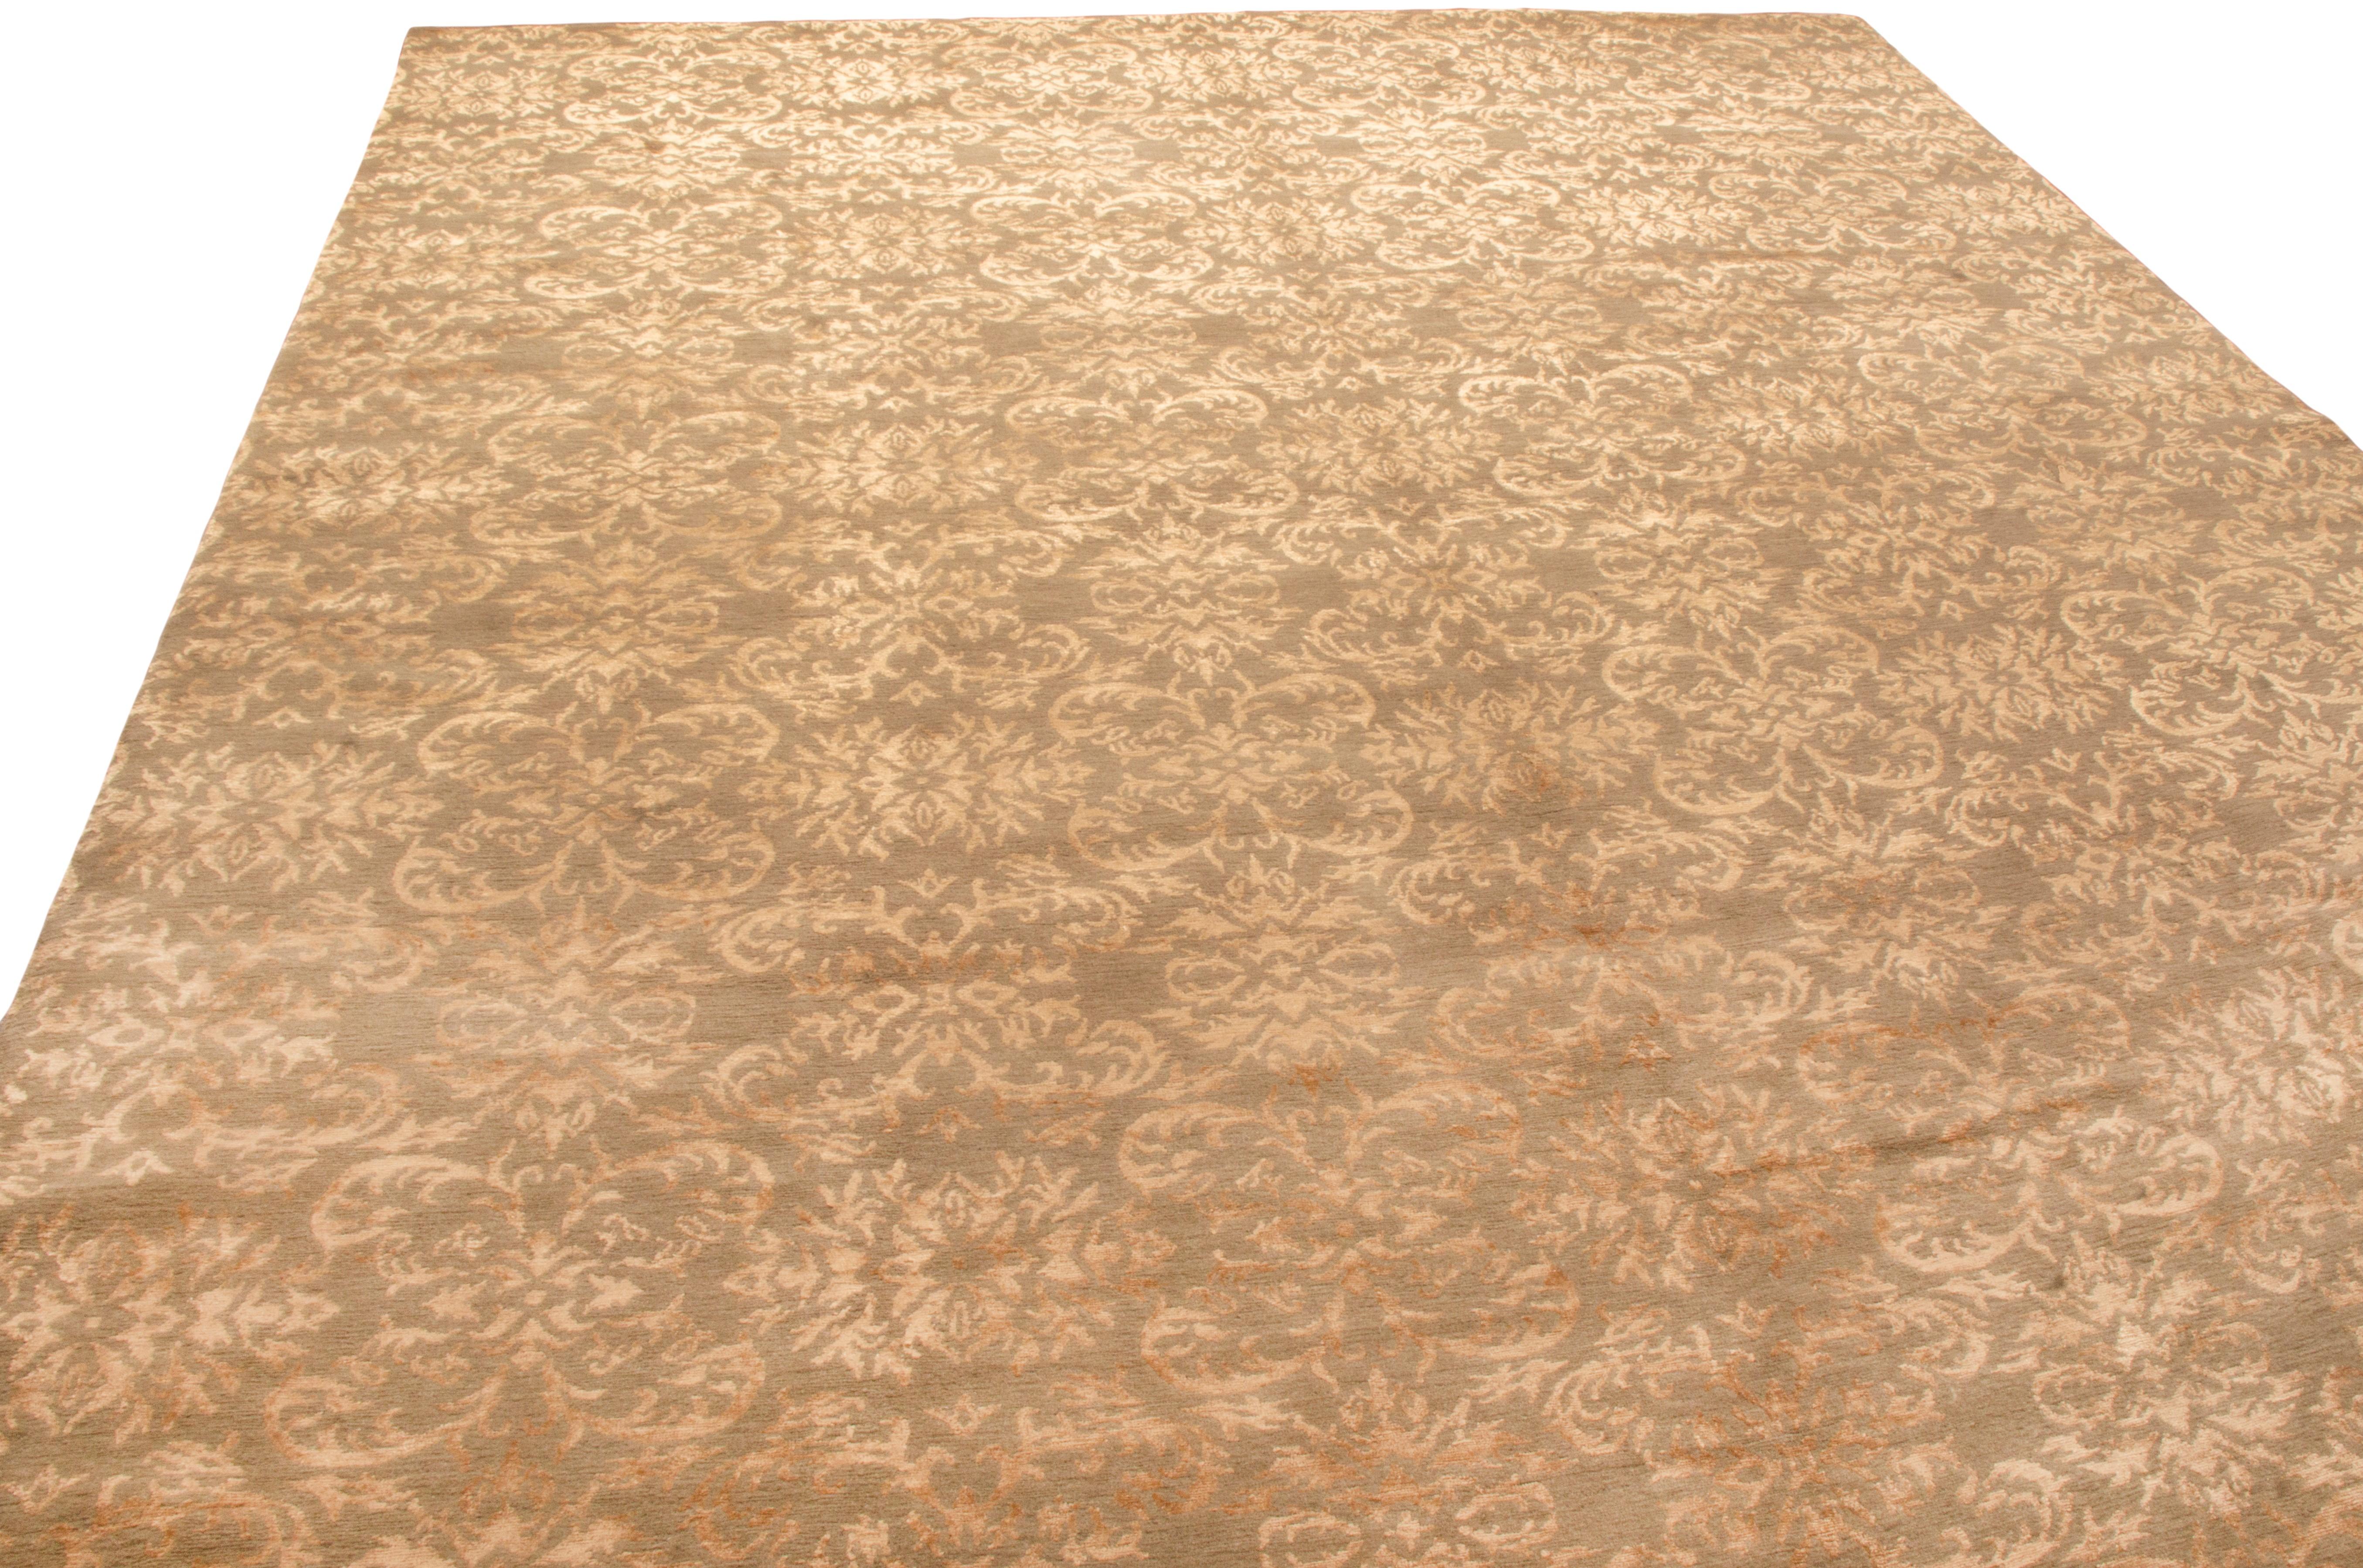 Originating from Nepal, this new Arabesque rug features a lustrous, fine weave of wool and silk complementing the all over field design. Hand knotted, the dominant, brass gold colourway is emphasized through the silk’s natural luster, giving a regal